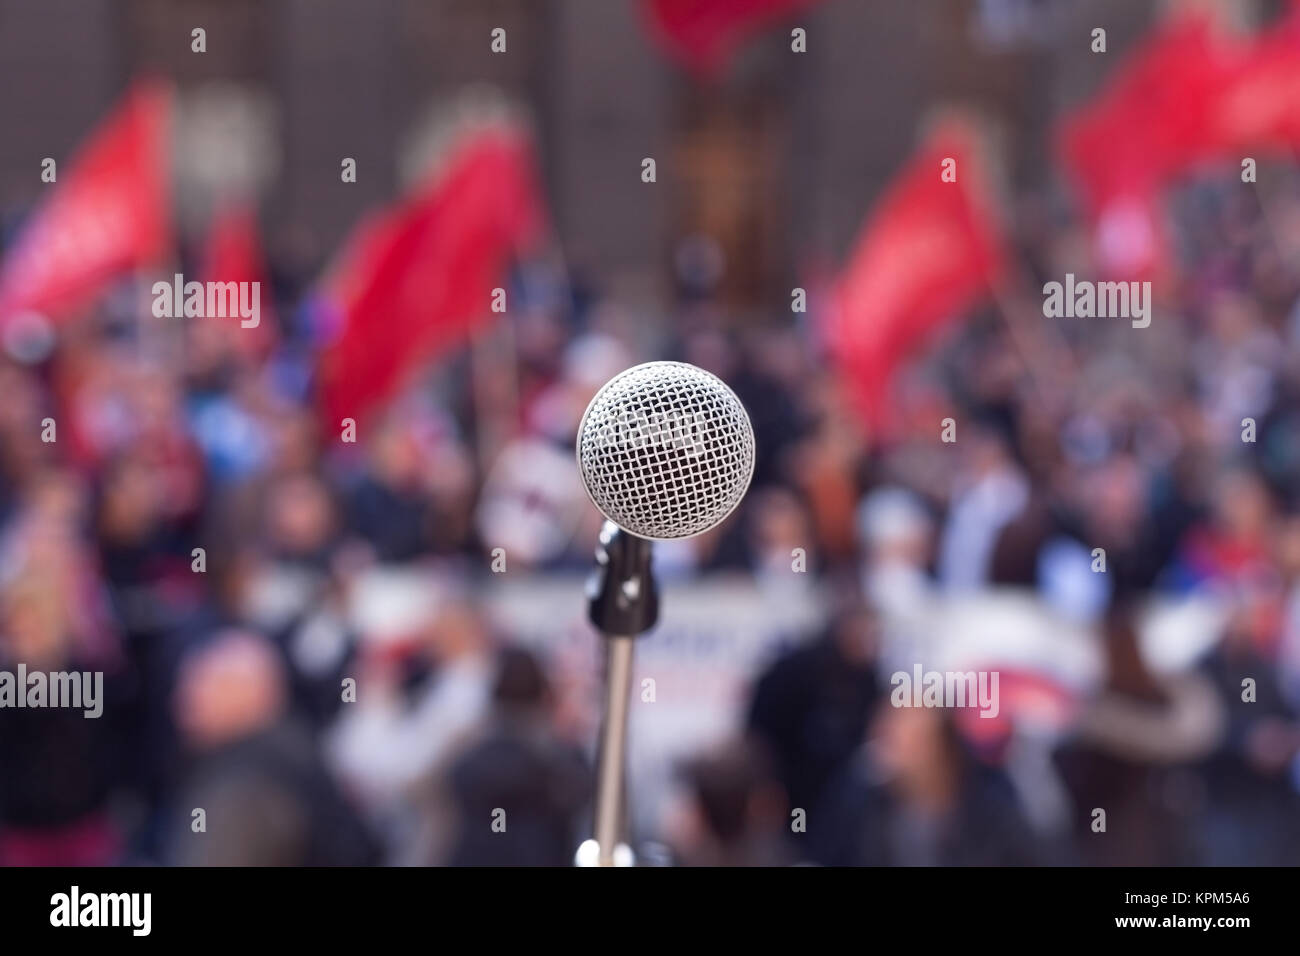 Public demonstration. Protest. Stock Photo